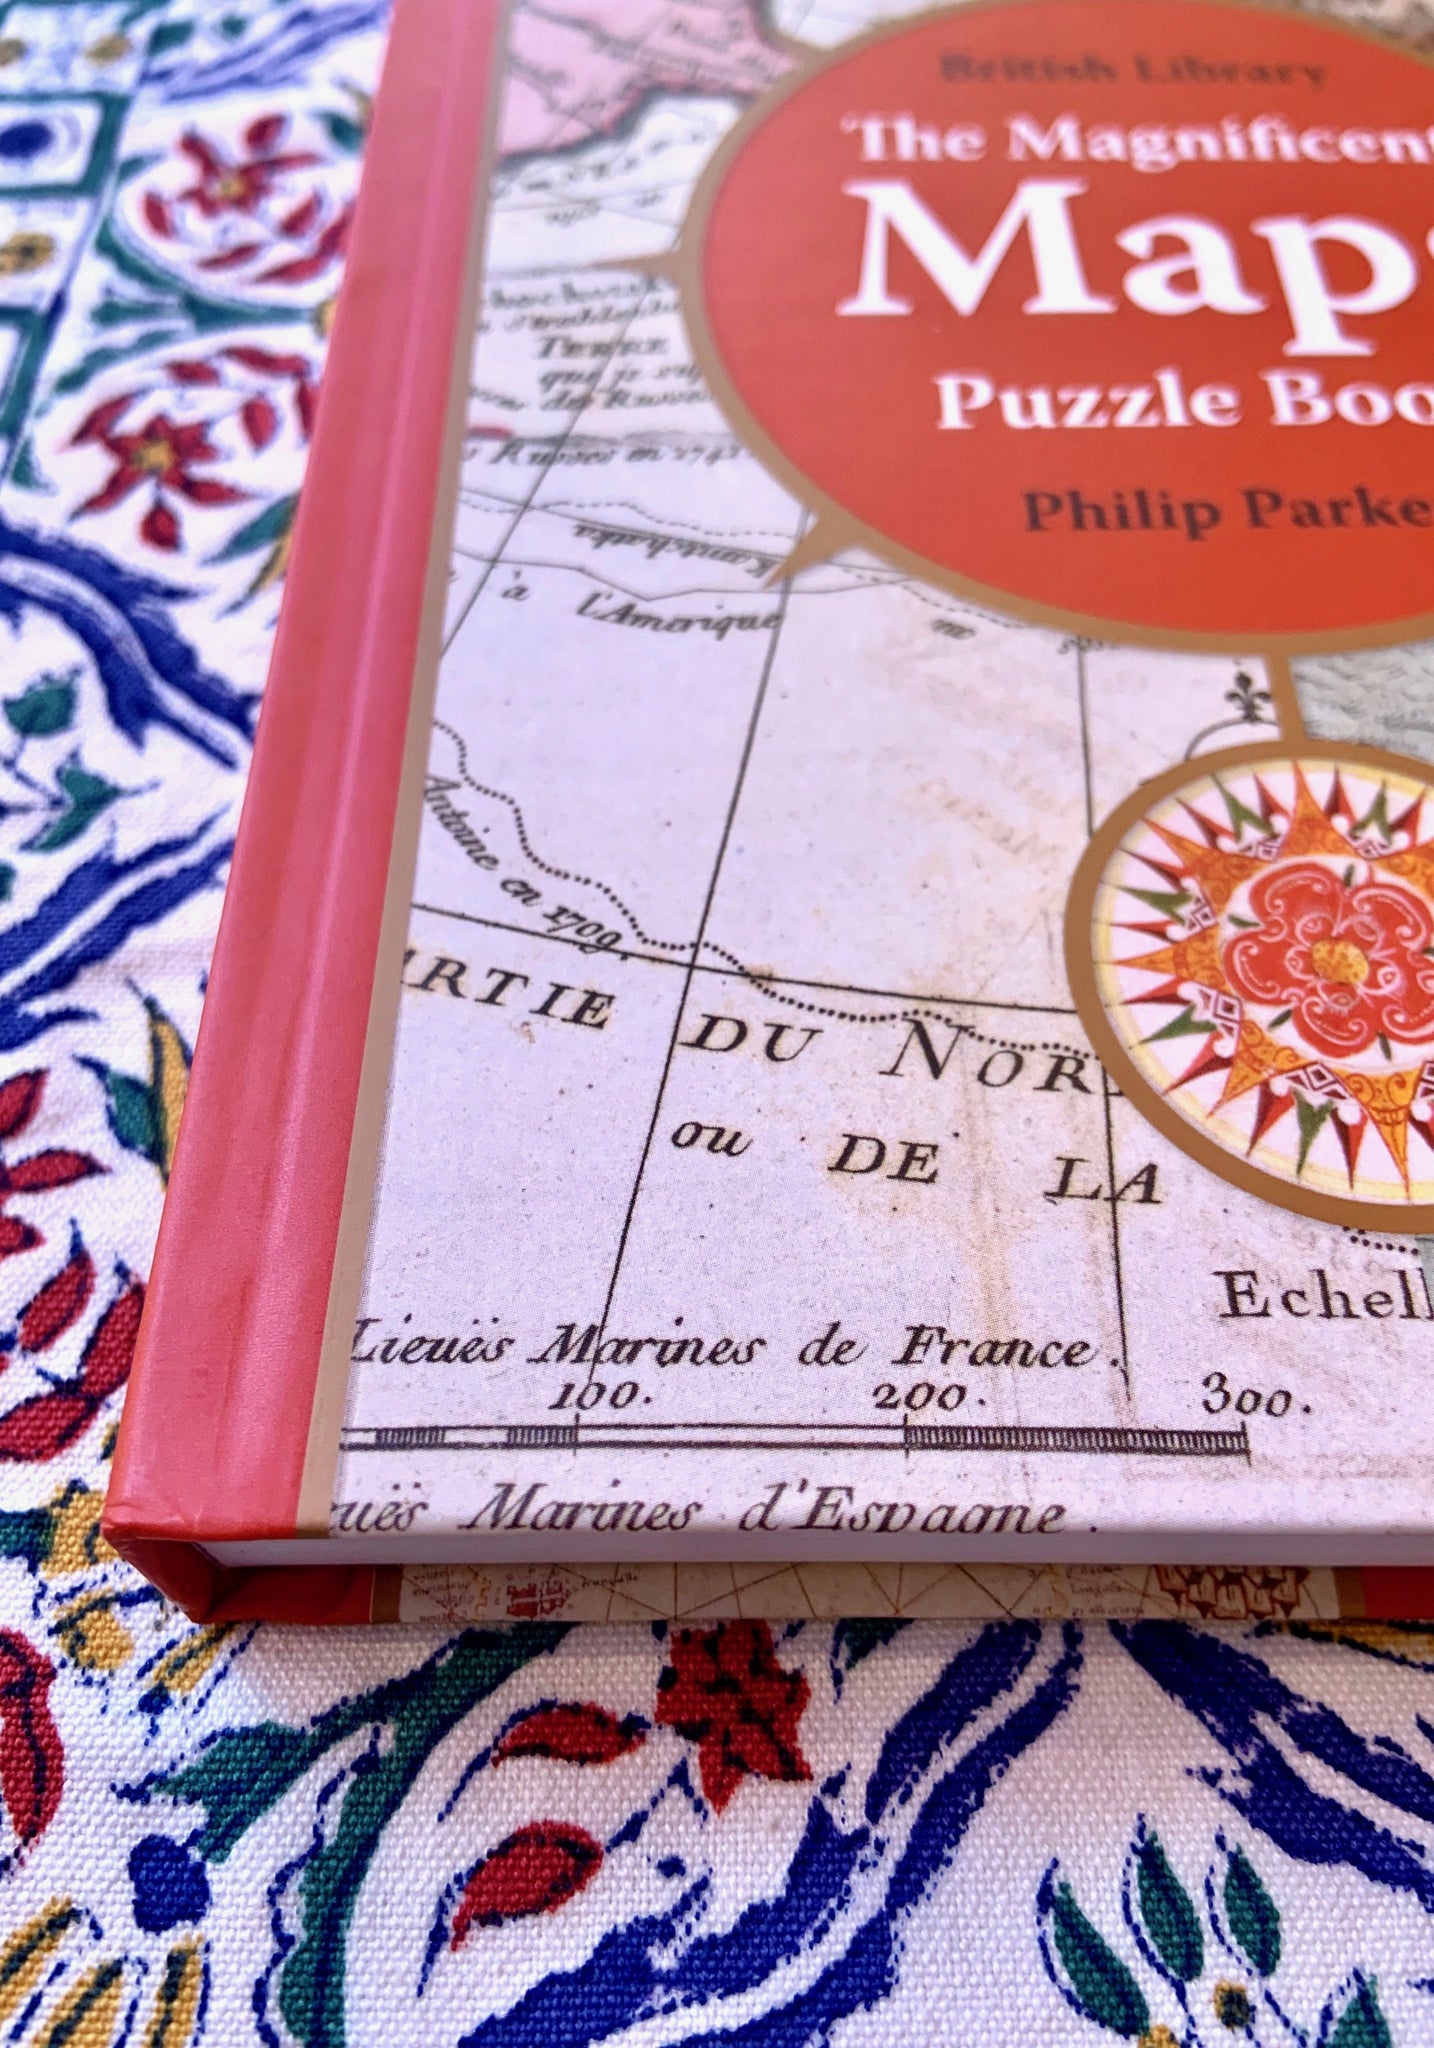 The British Library's Magnificent Maps Puzzle Book